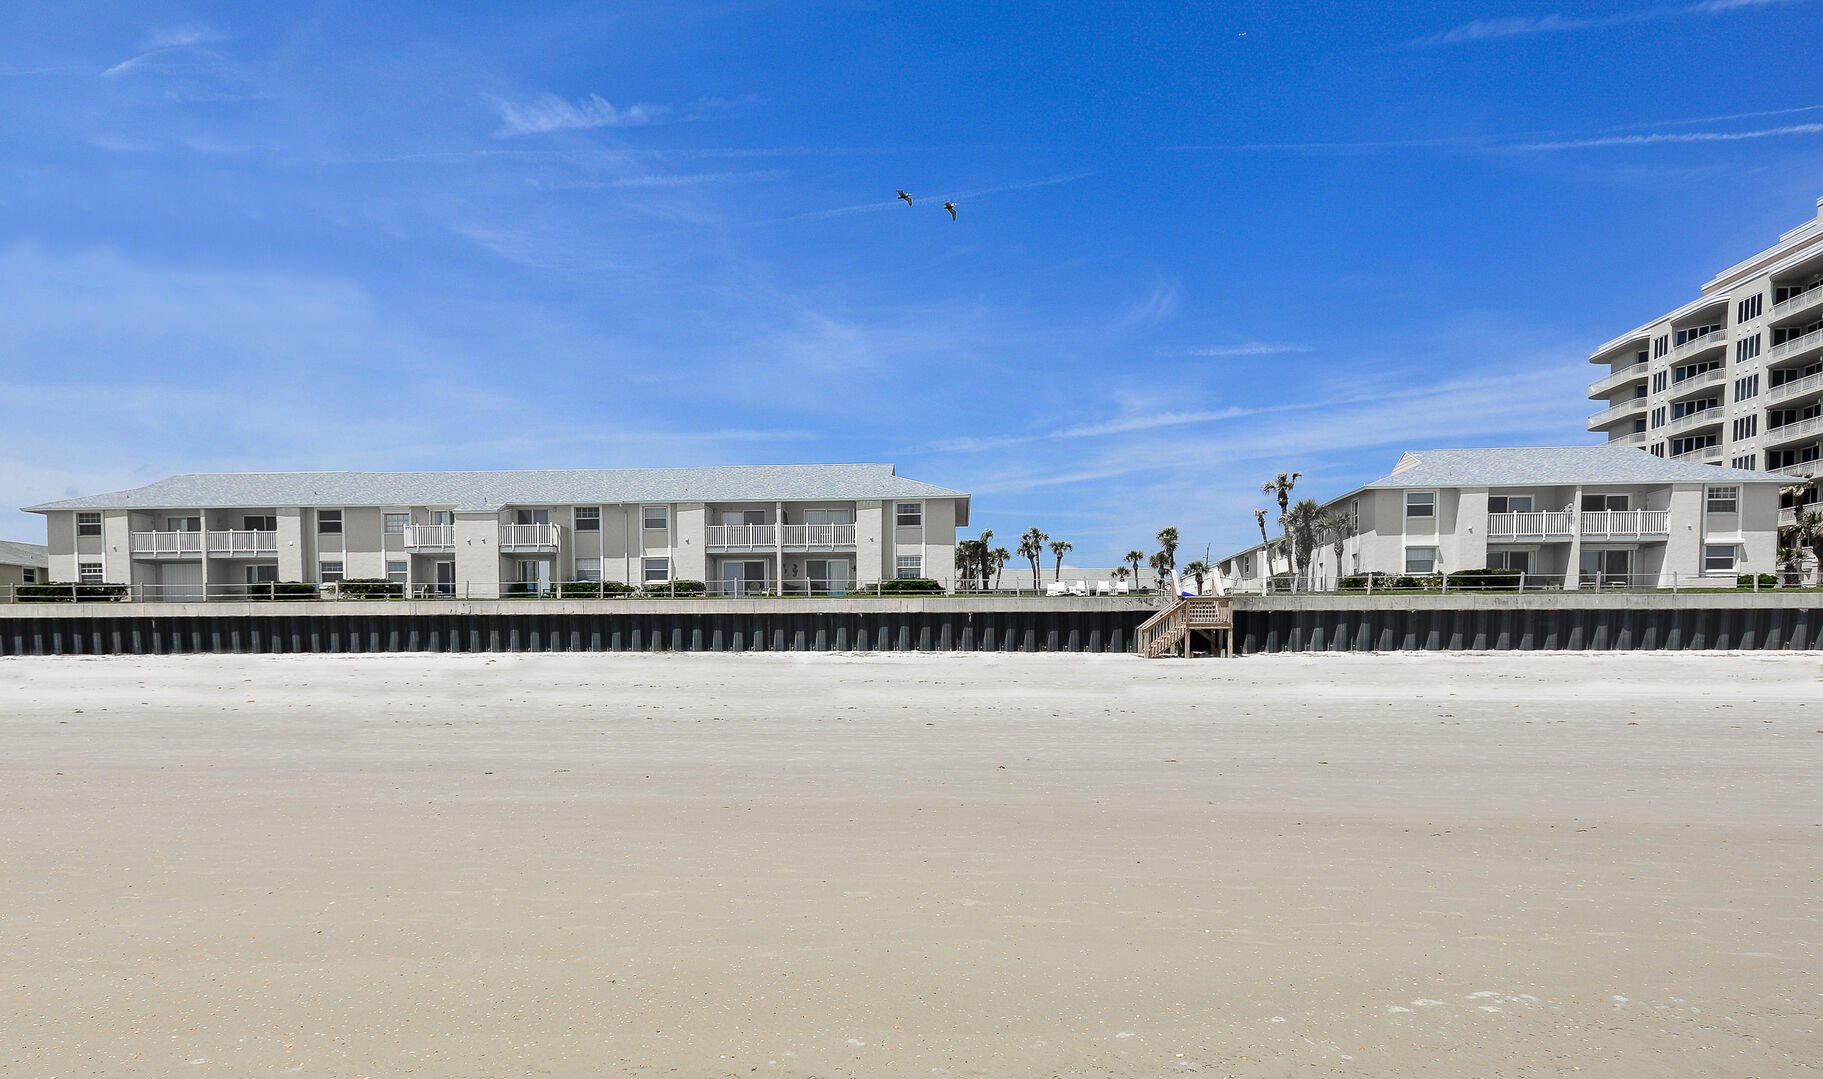 View of the complex from the beach.